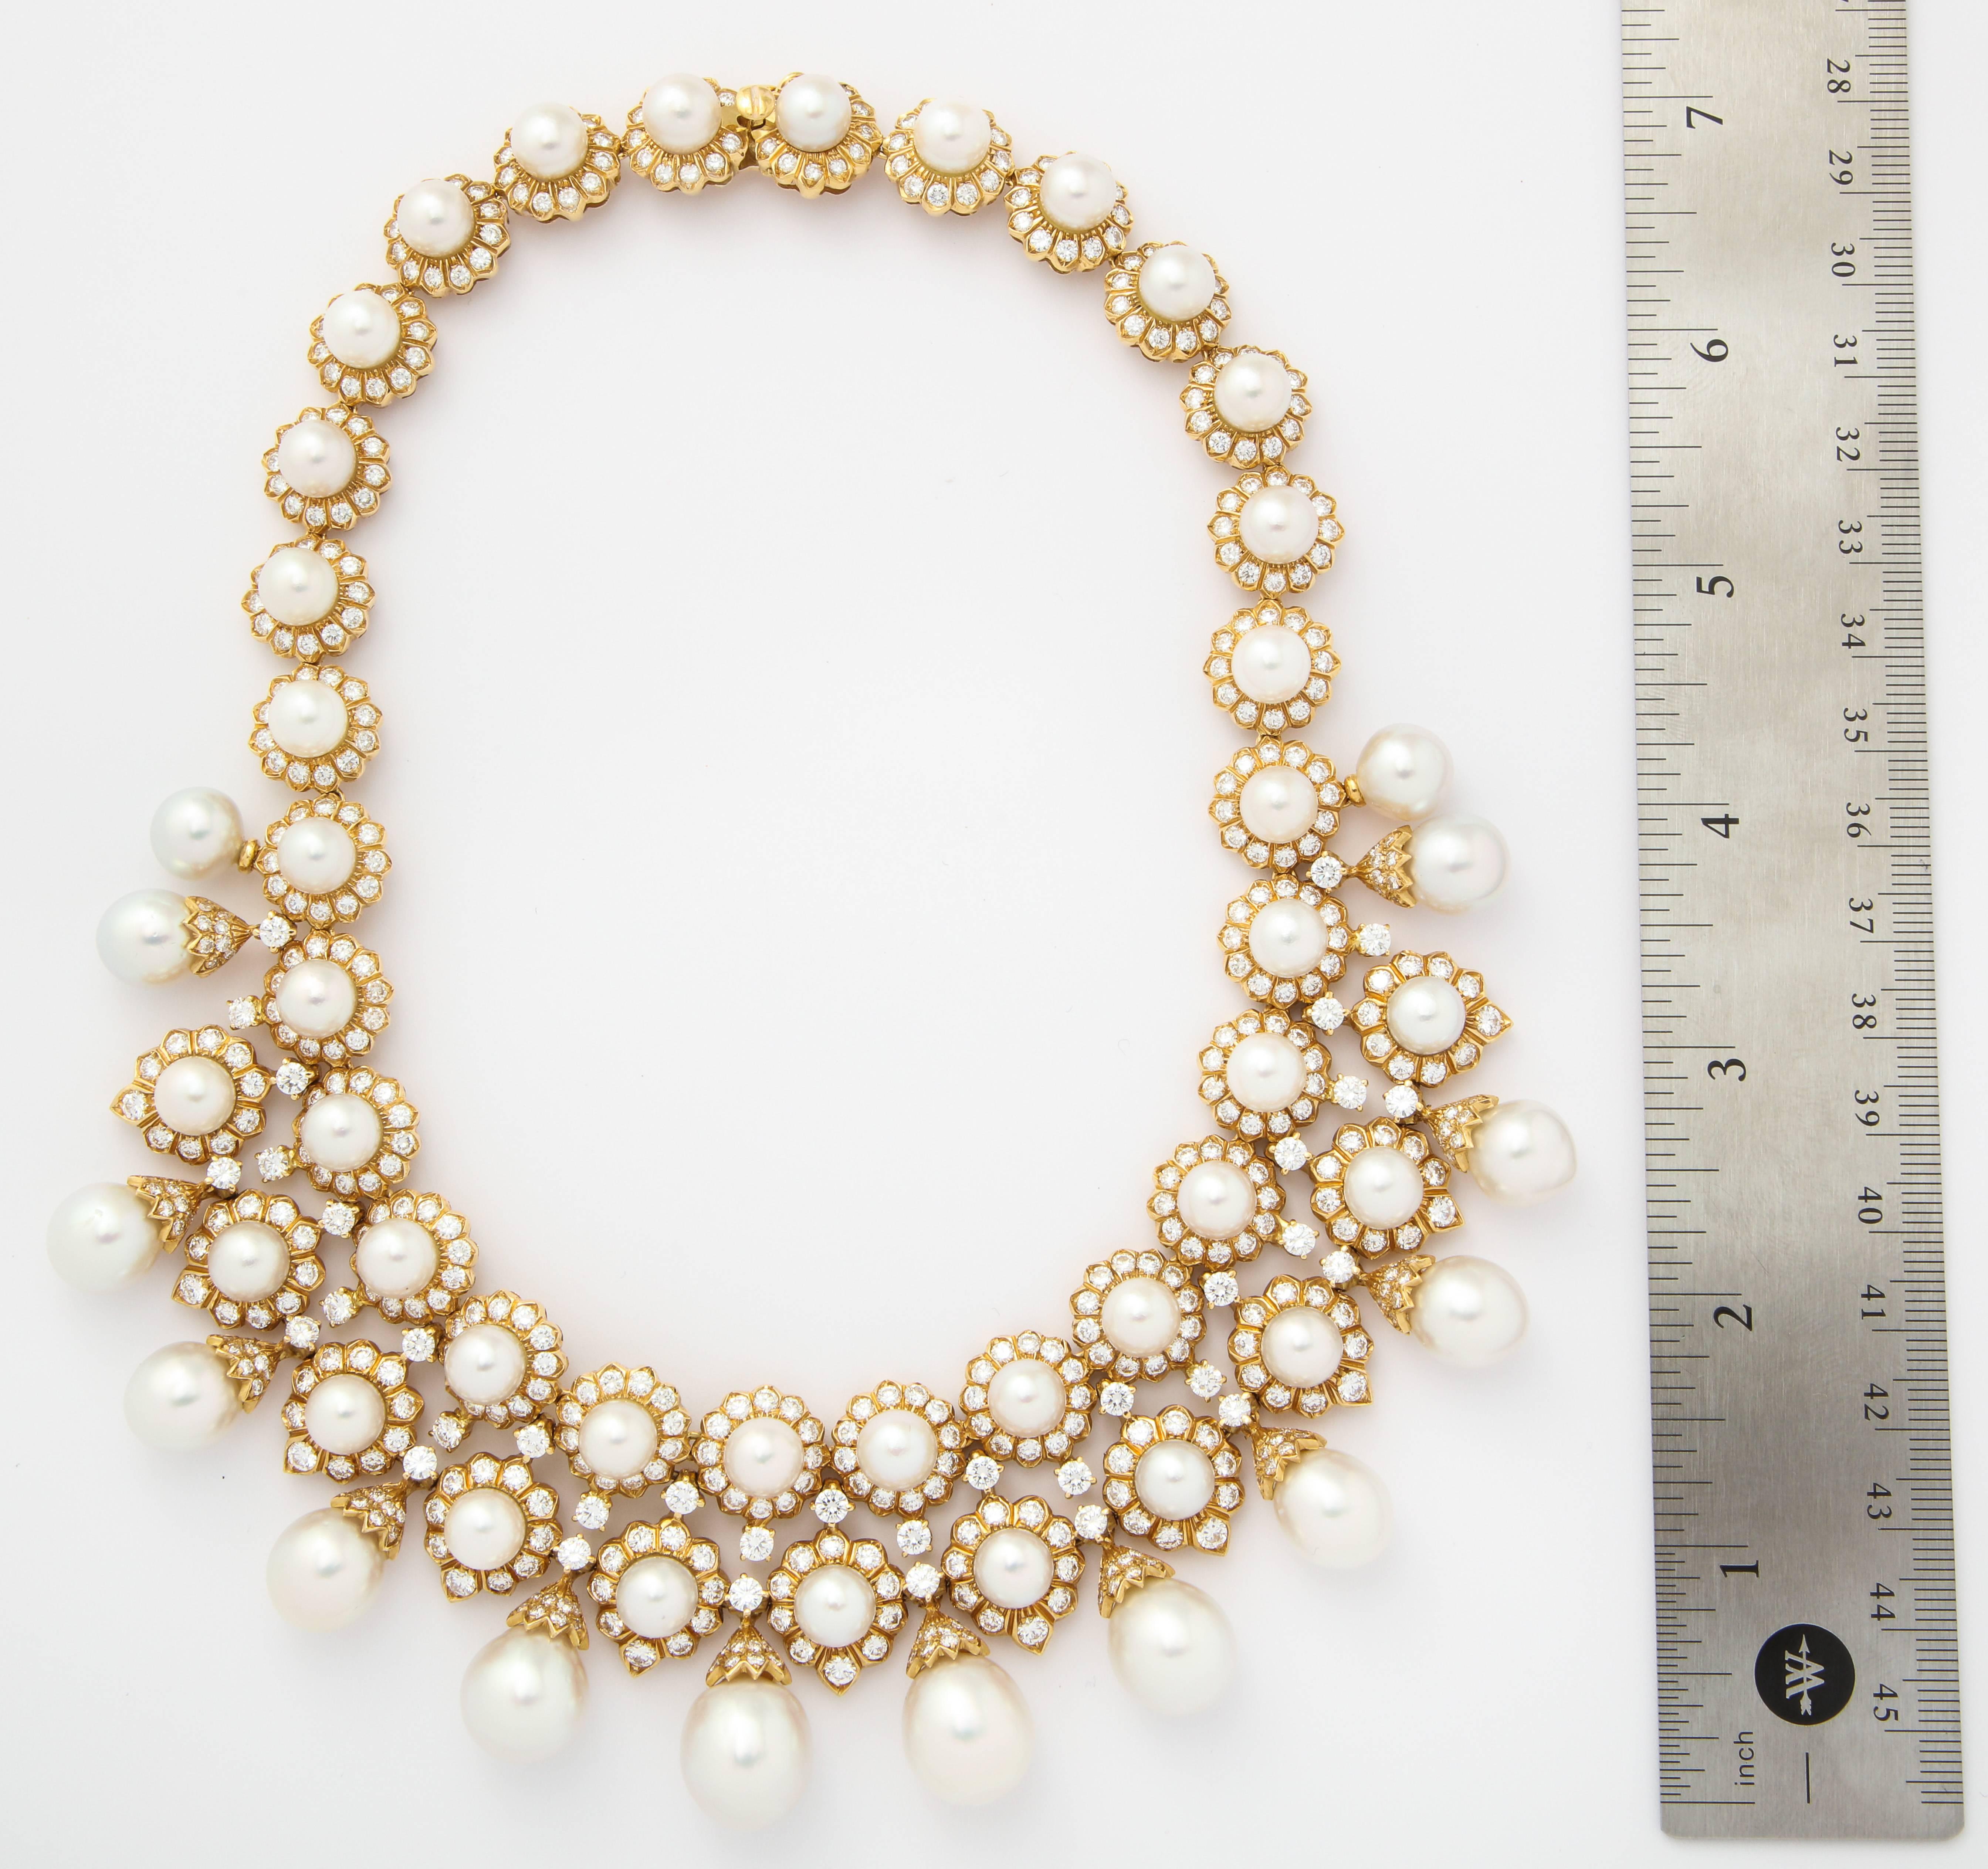 Impressive Cultured Pearl and Diamond Parure Set

Very fine quality diamonds. Weight approx 55-60 ct

Matching necklace, earrings and brooch.

Earrings have detachable pearls: "Day and night"